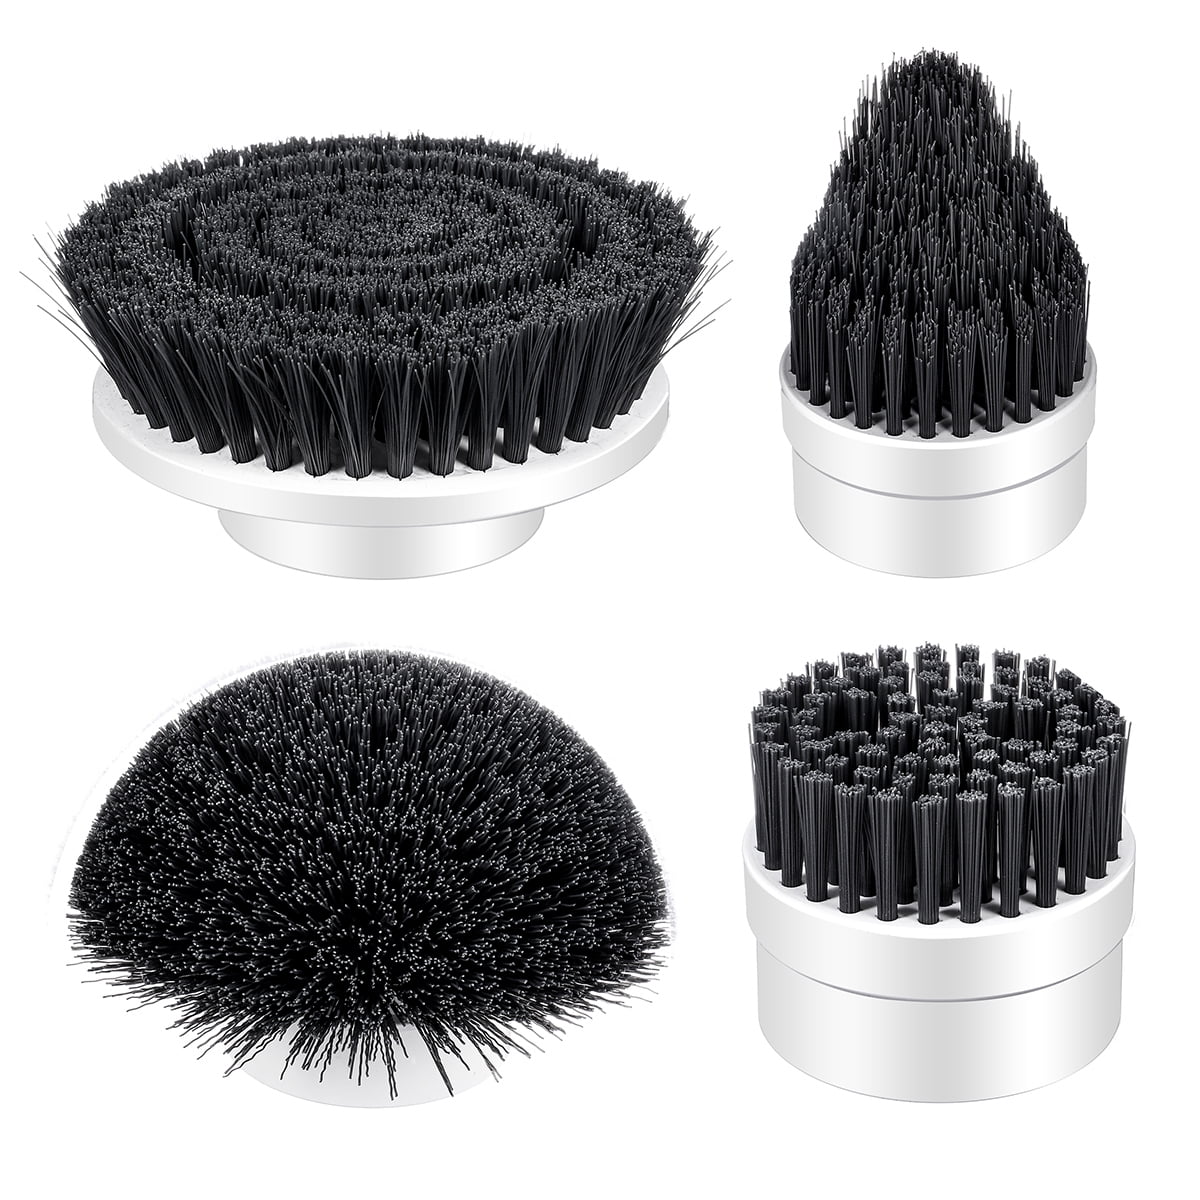 Meco Electric Cordless Spin Brush High Power Tub Scrubber Rotation Cleaning  Tools For Bathtub With 3 Replaceable Brush Heads Us - Cleaning Brushes -  AliExpress